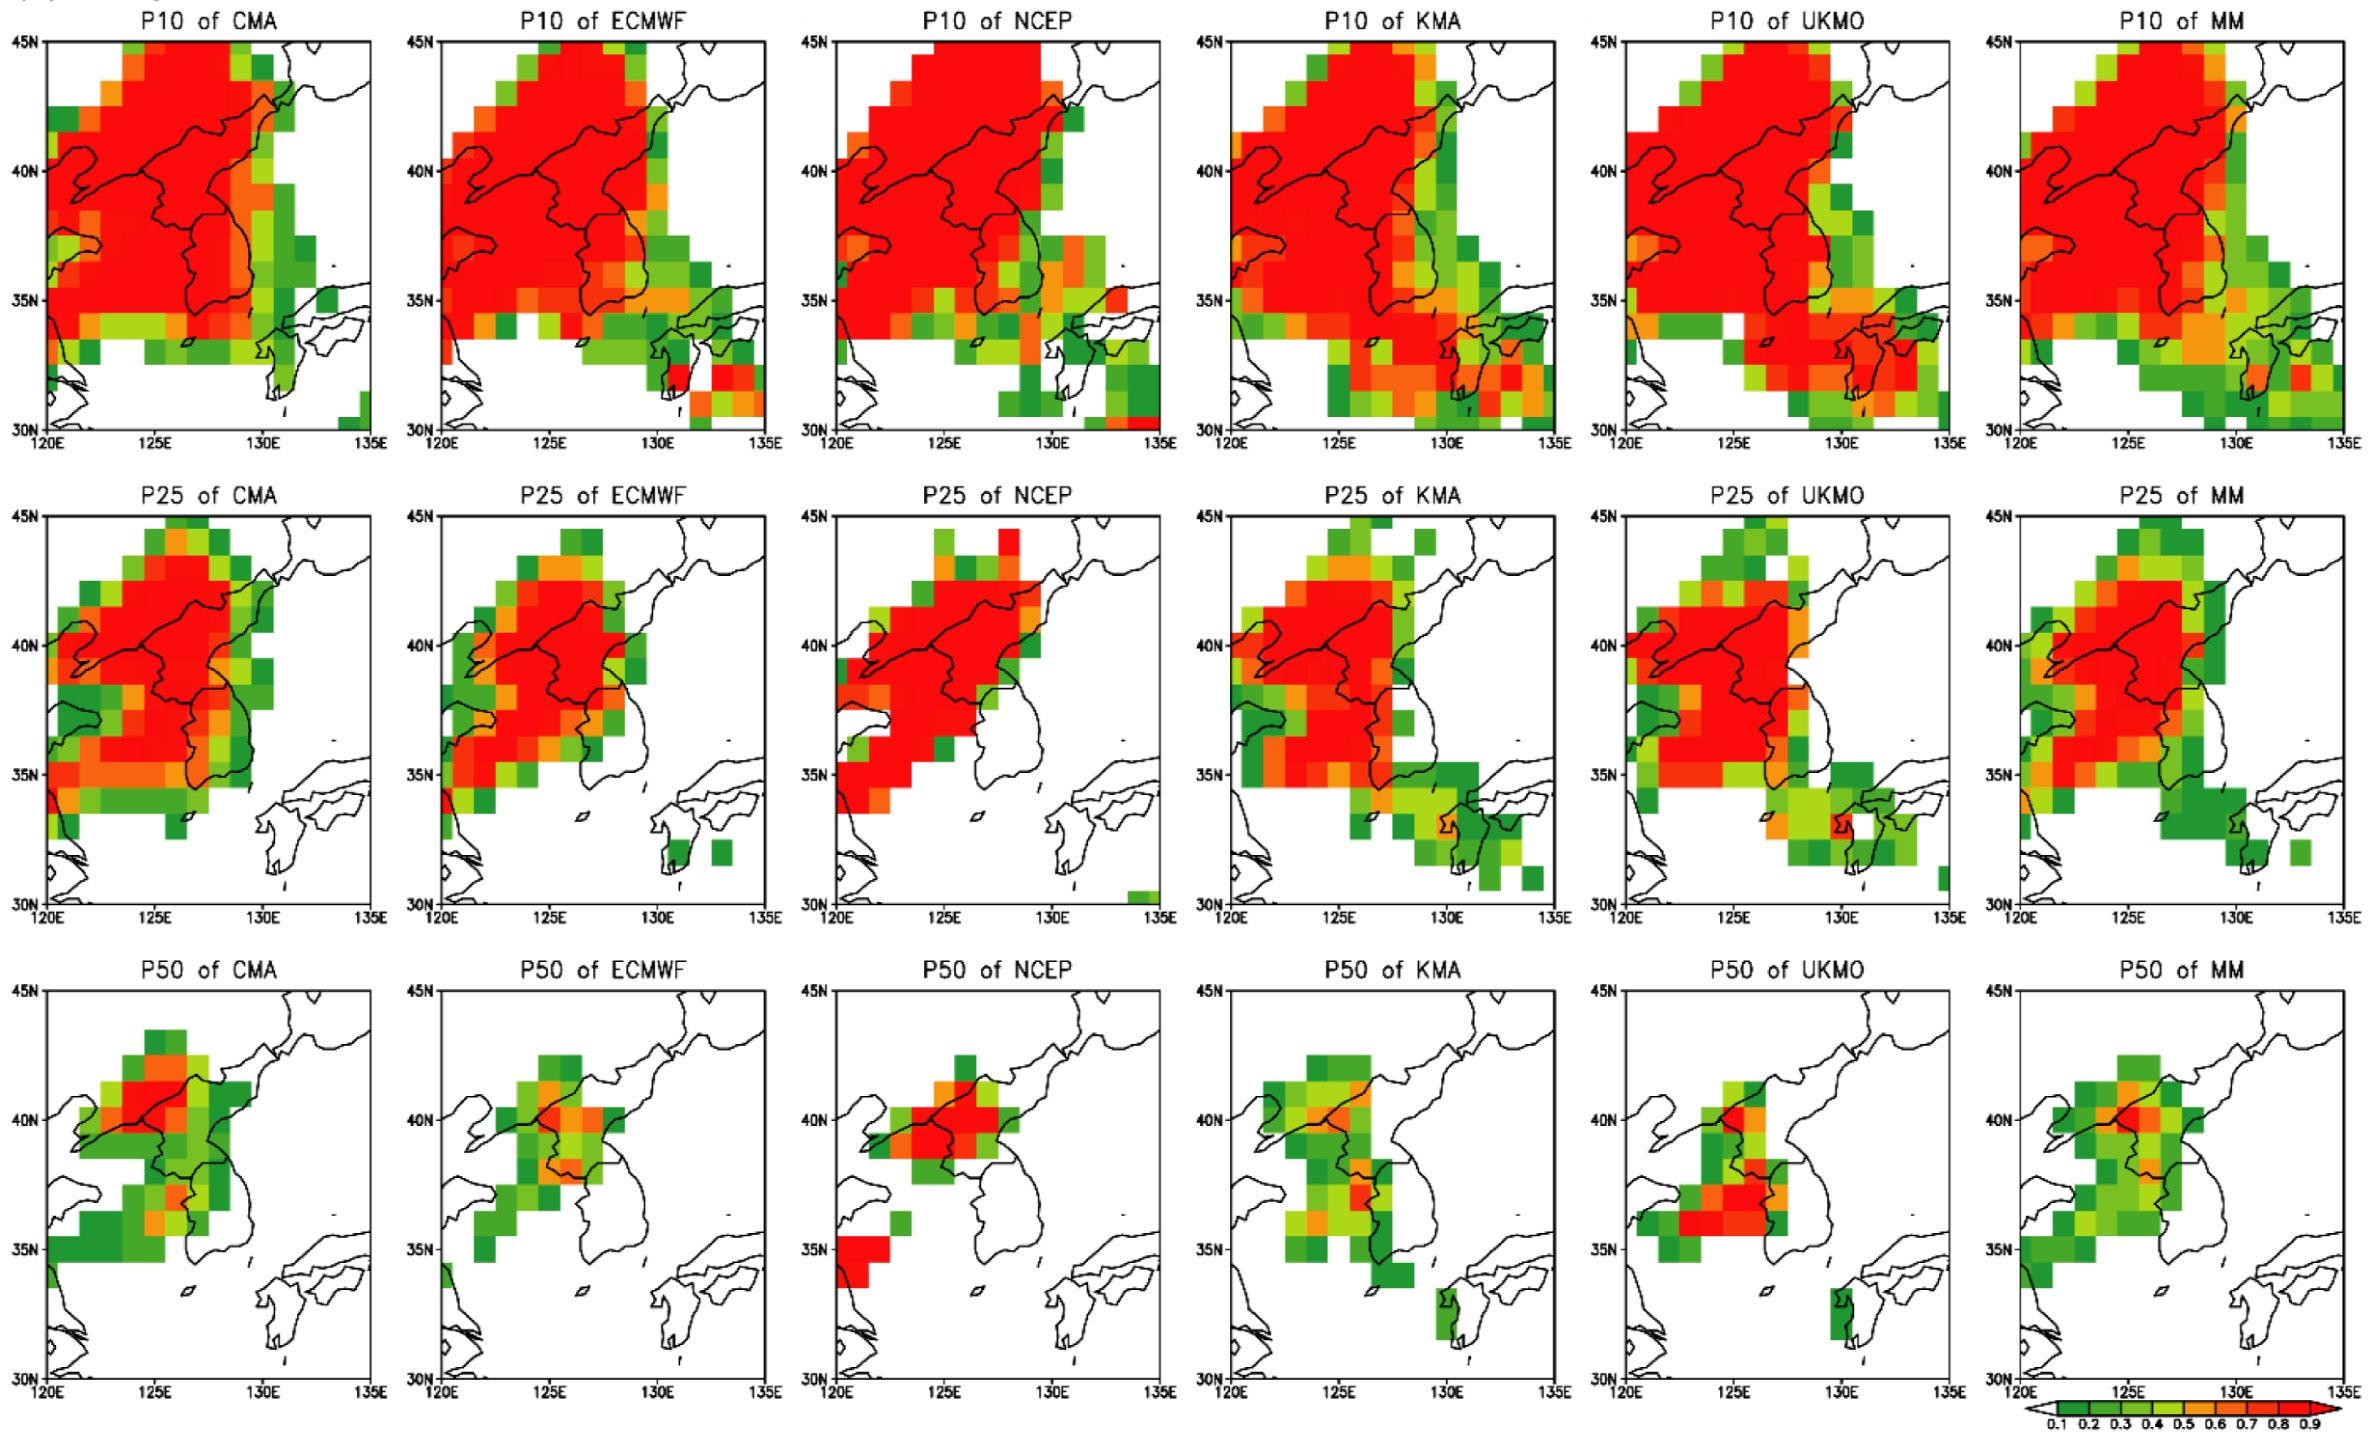 Fig. 3.4.1.12. Spatial distribution of precipitation probability forecasts in excess of 10.0, 25.0, and 50.0 mm per 24 hours at five operational forecast centers and multi-model ensembles from 1-day lead time on 29 June 2012